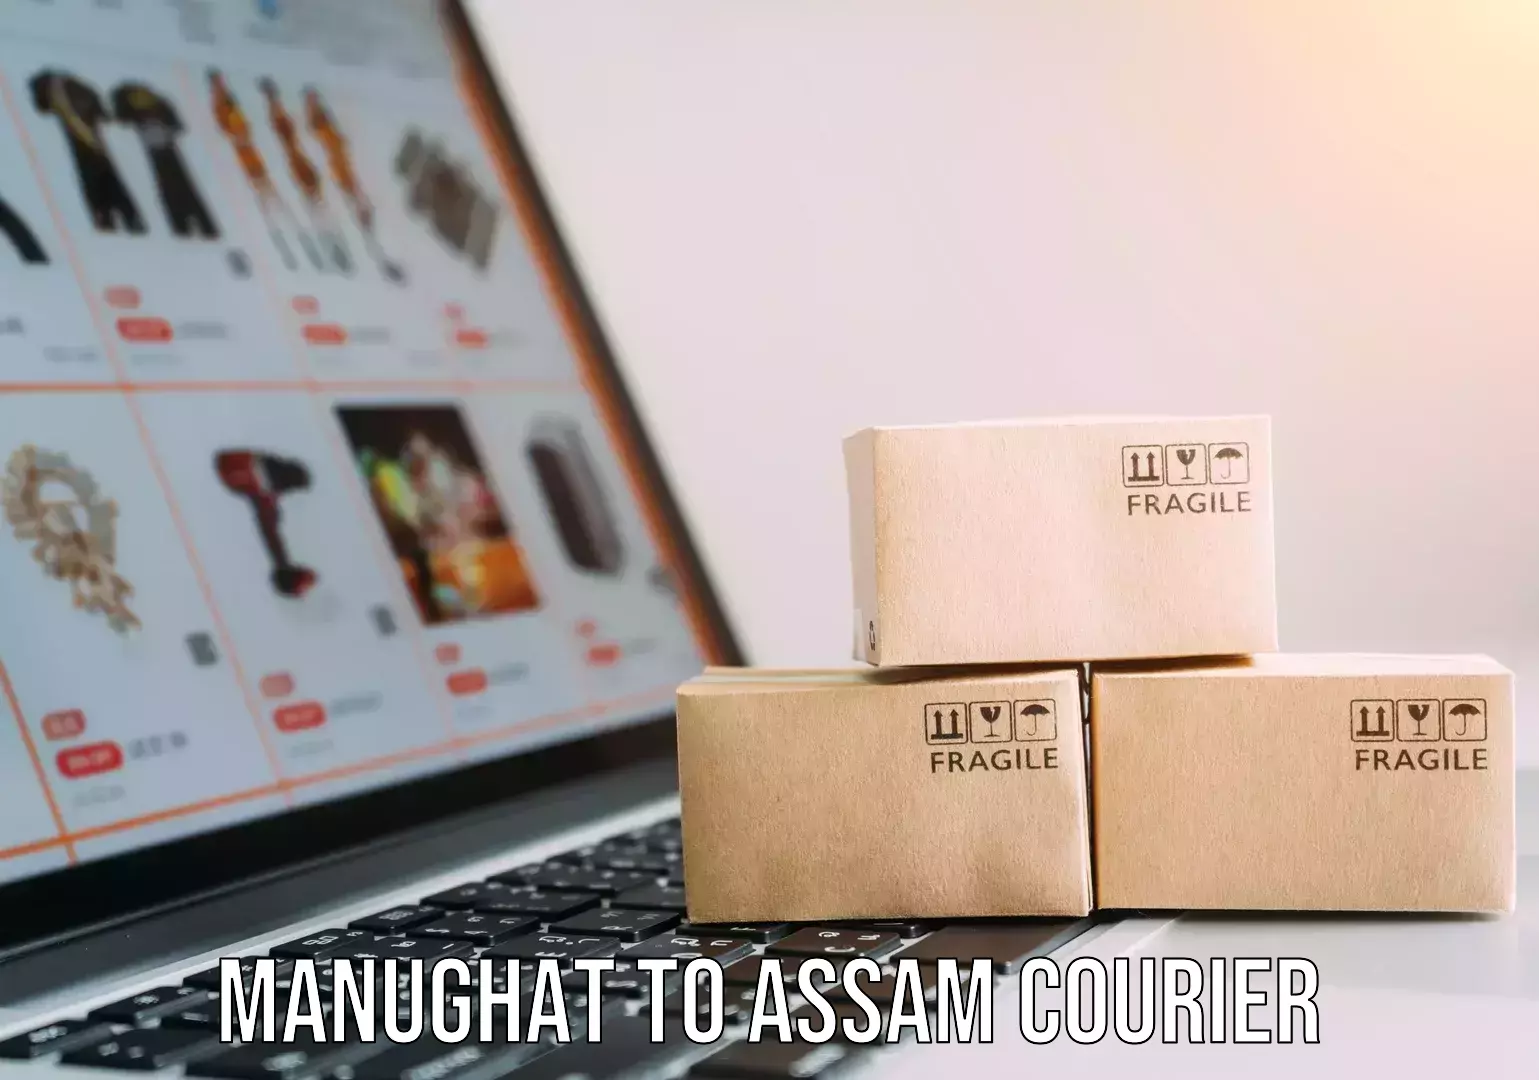 Global shipping solutions Manughat to Assam